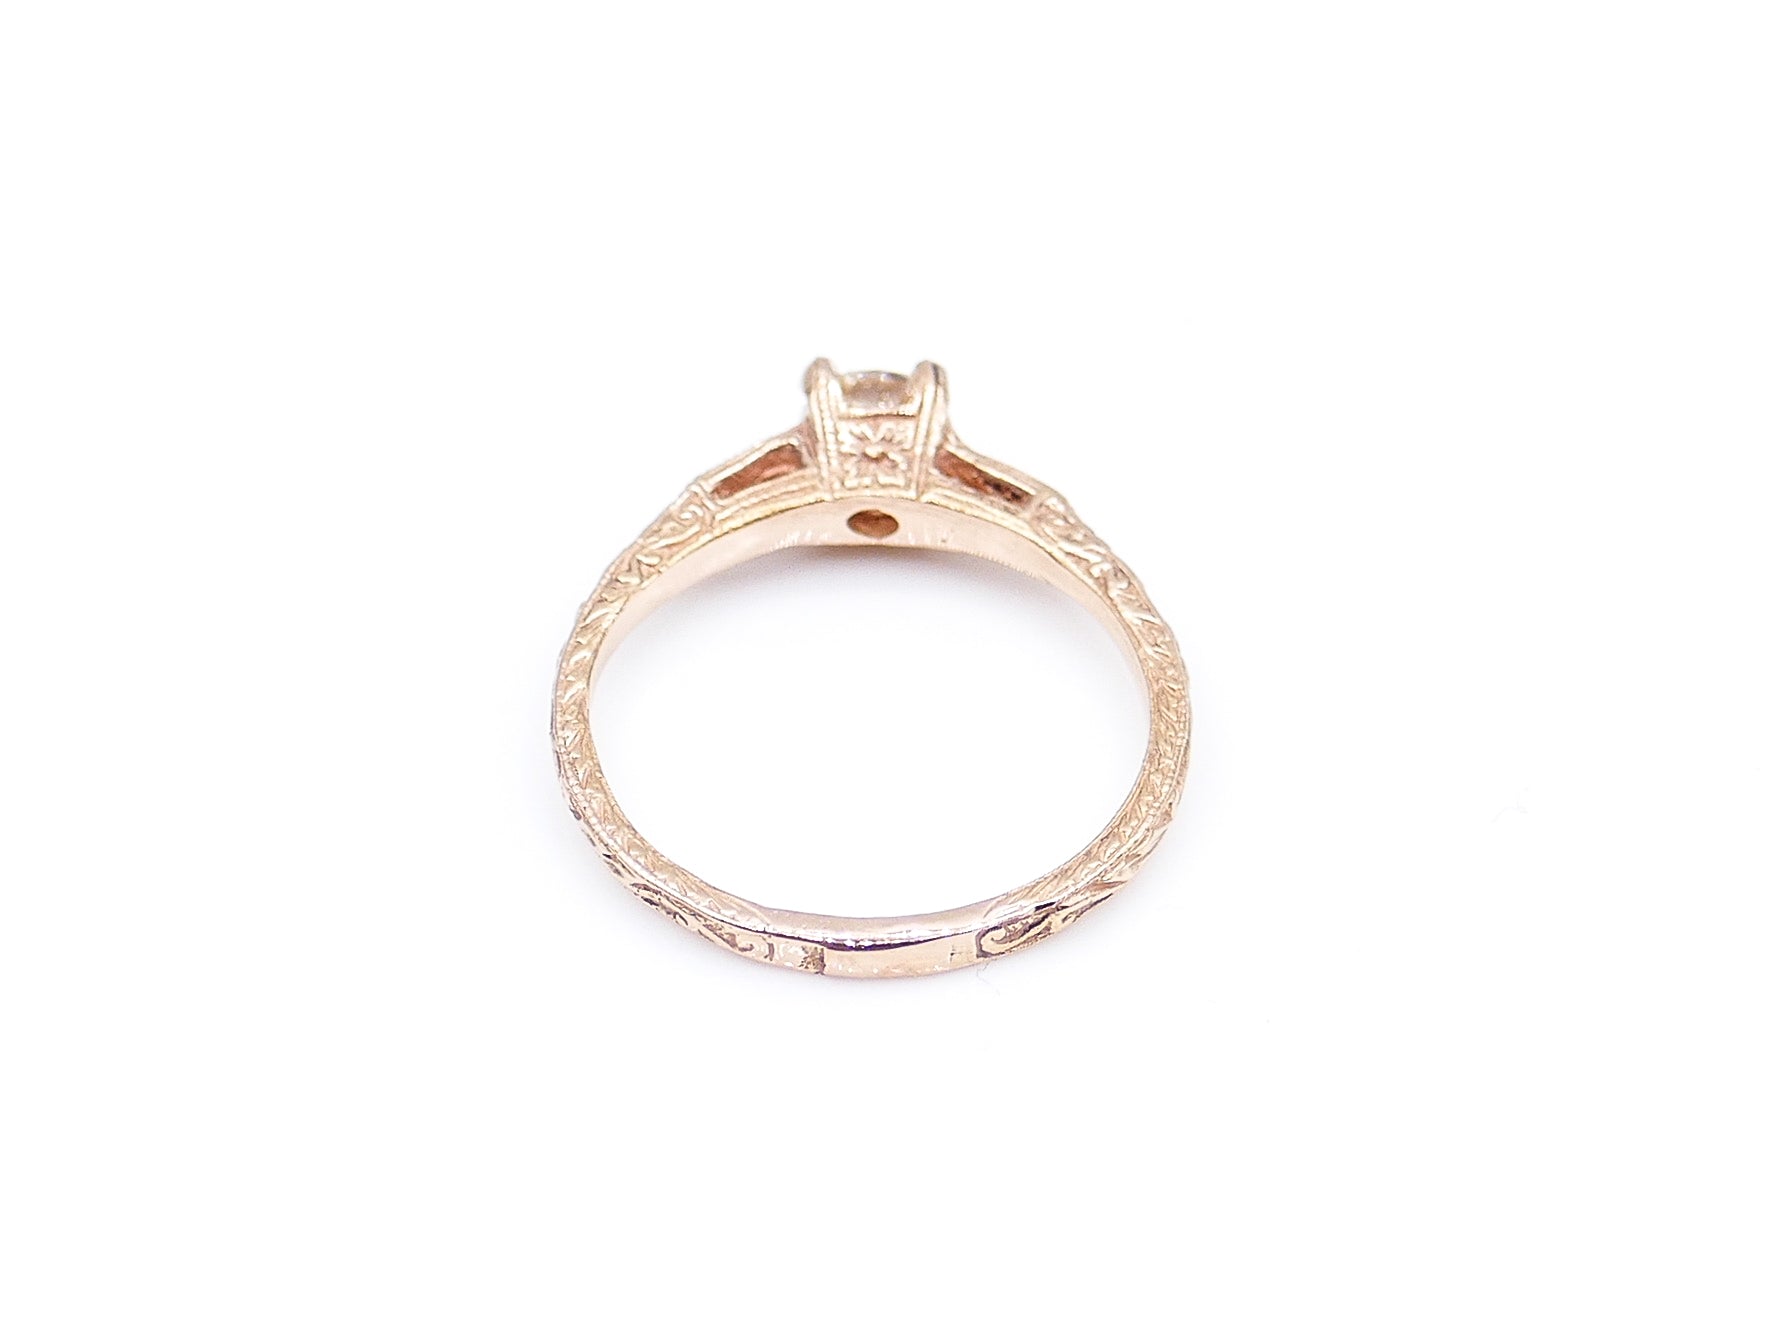 Custom Antique-Style Diamond and Rose Gold Engagement Ring